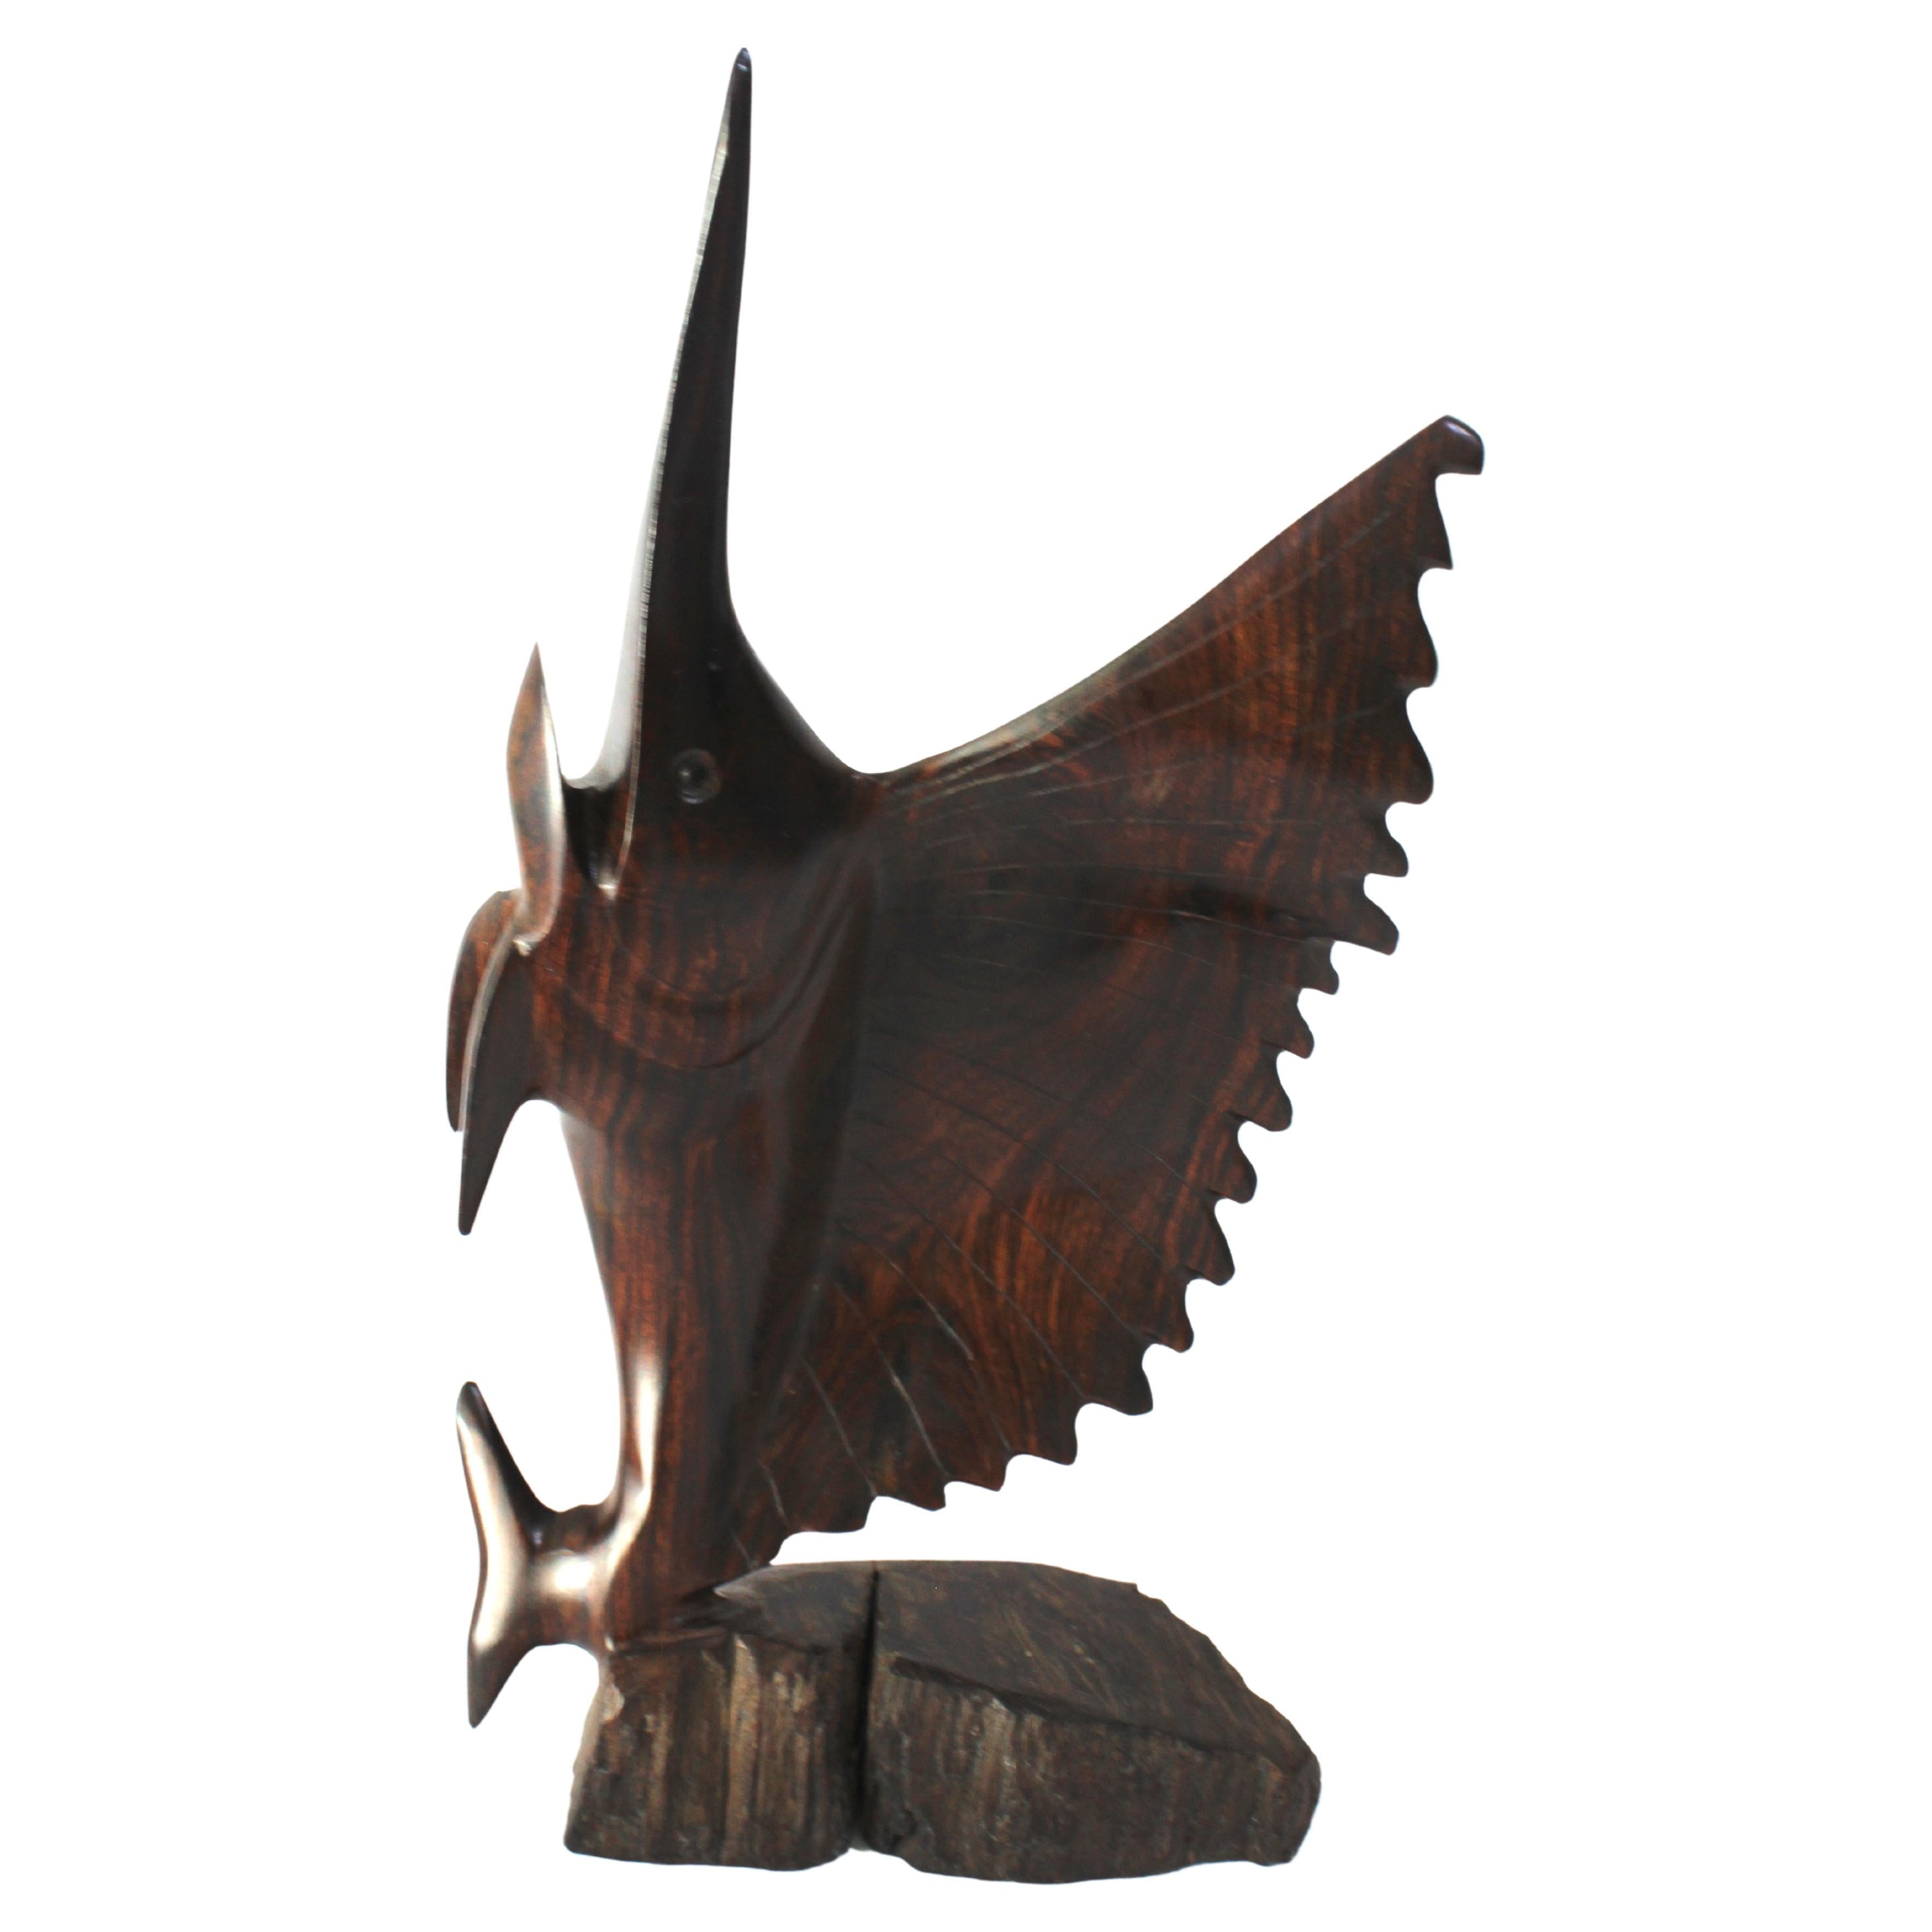 This stylish rosewood figure of a sailfish was created in Bali and it will make a subtle statement with its form and use of materials.